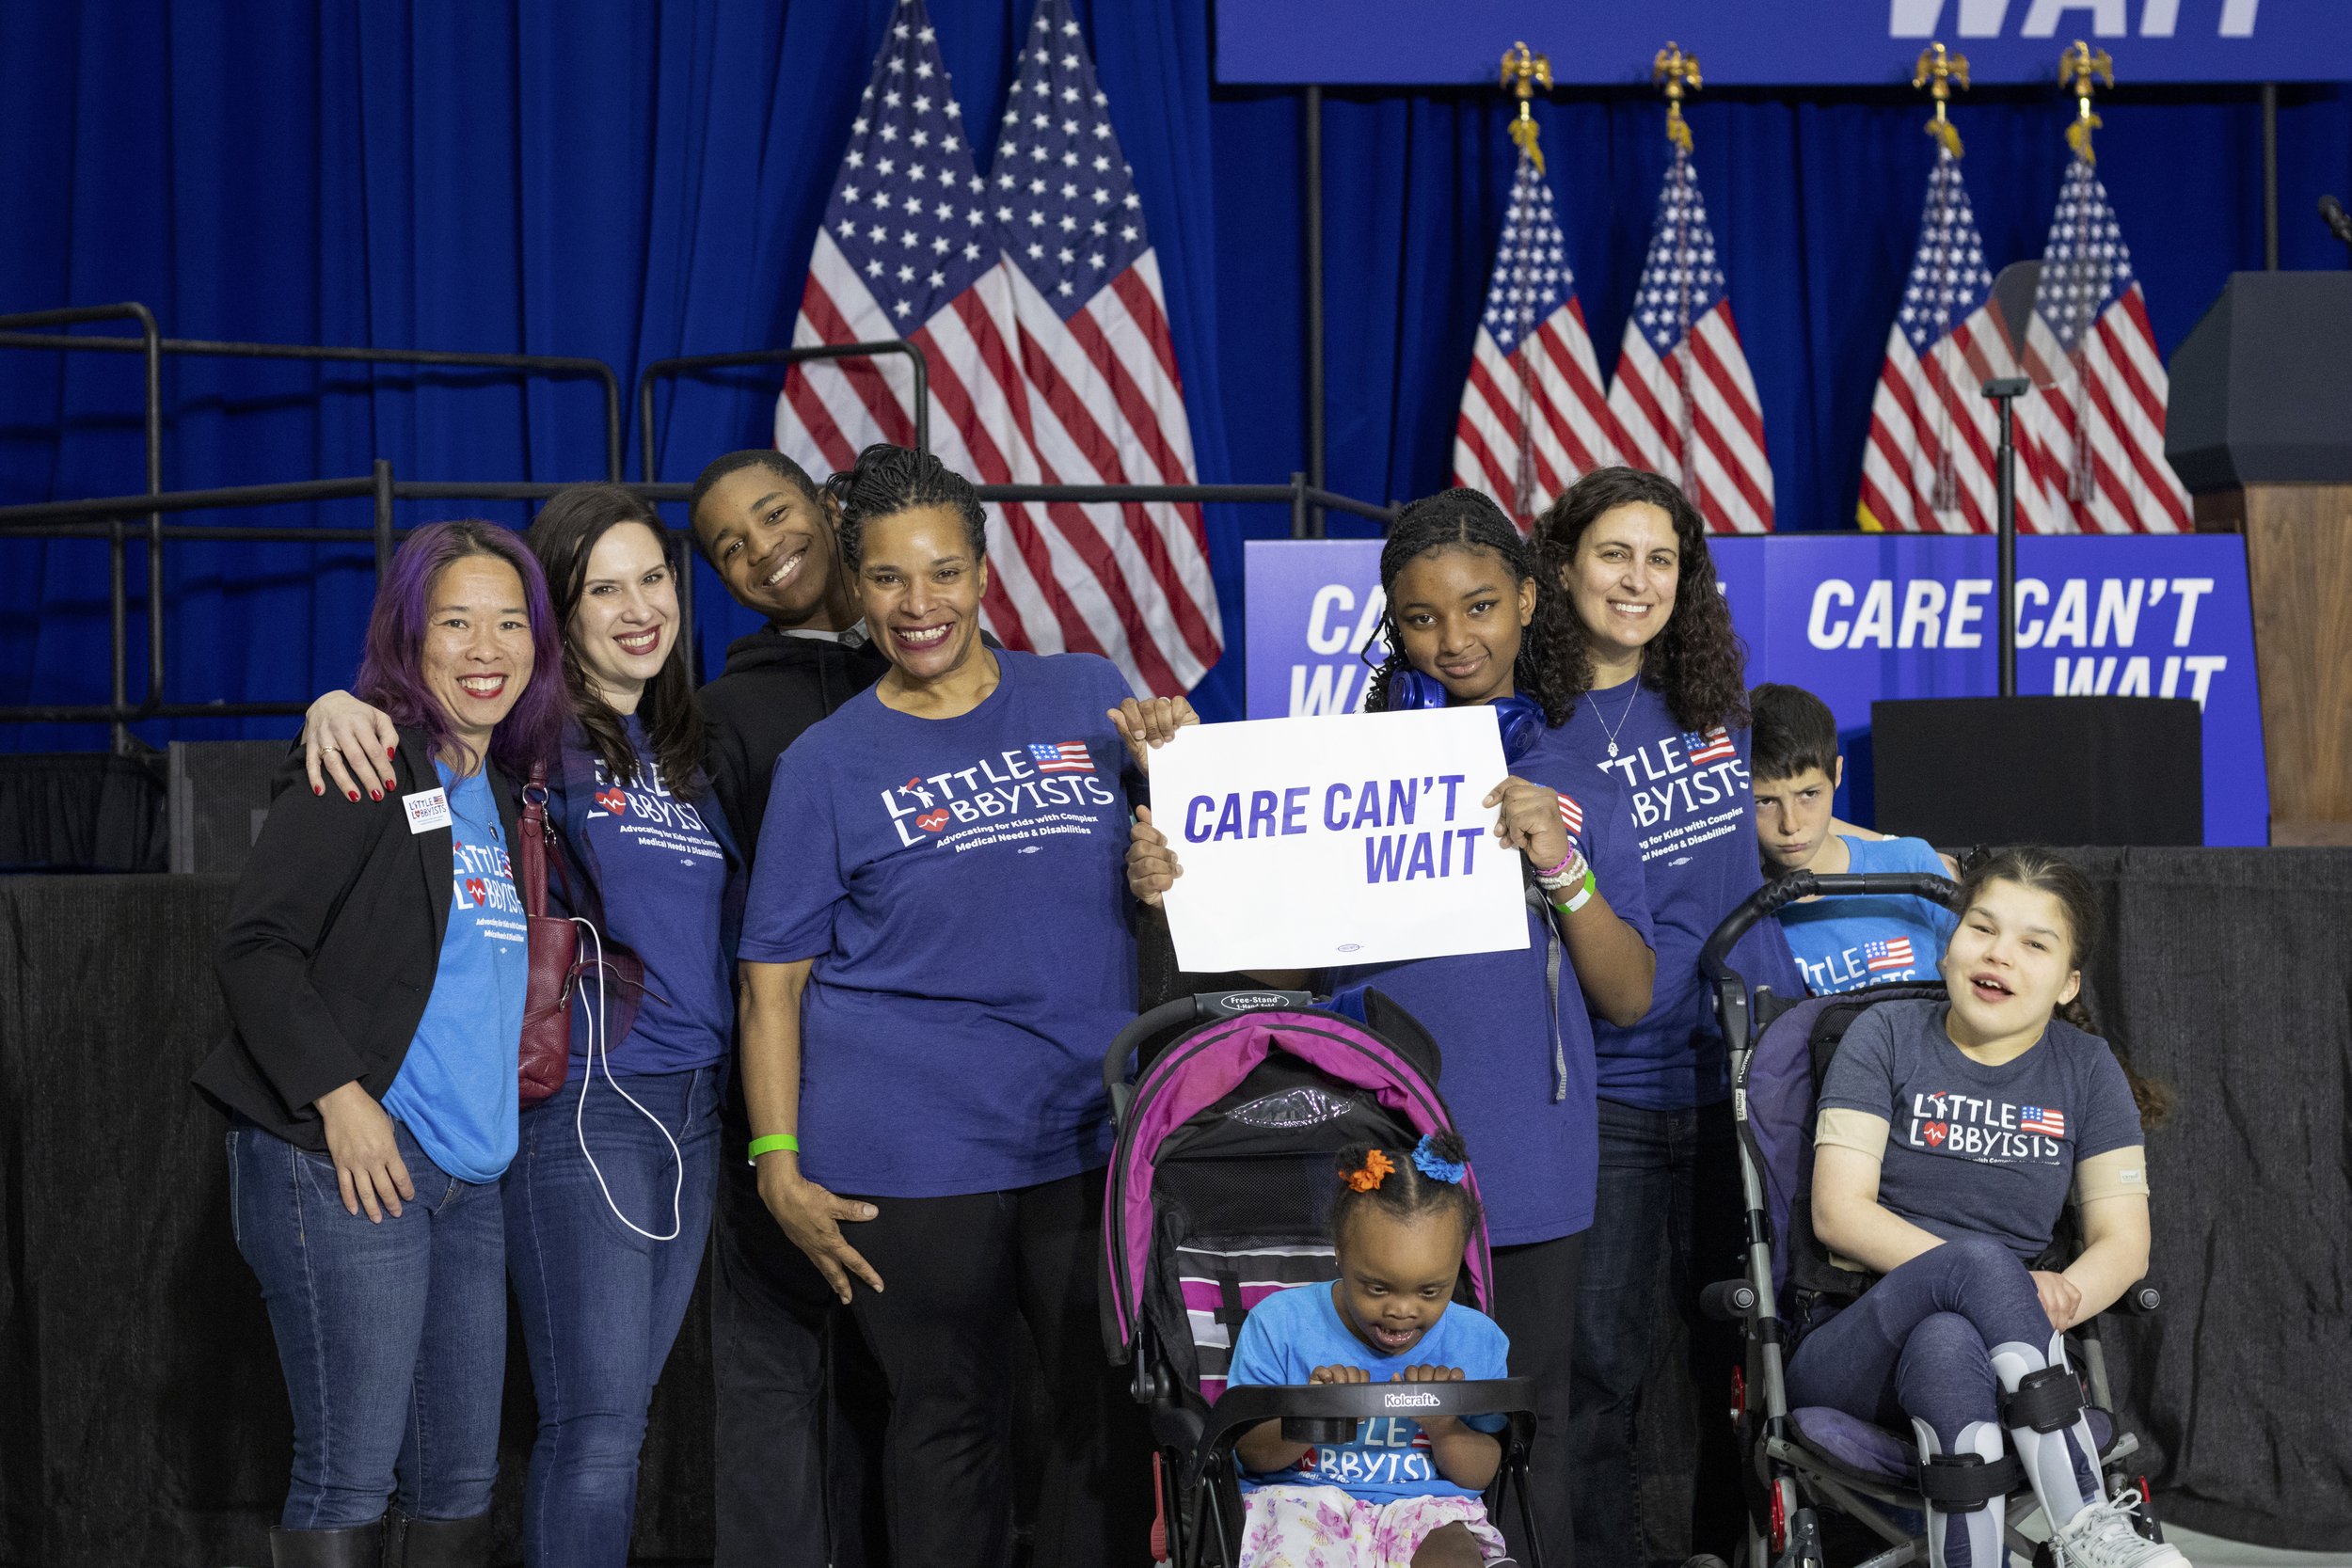  Another group of Little Lobbyists families poses in front of the stage, some standing, some using mobility devices. Danielle’s daughter Autumn holds a sign that says “Care Can’t Wait.” 